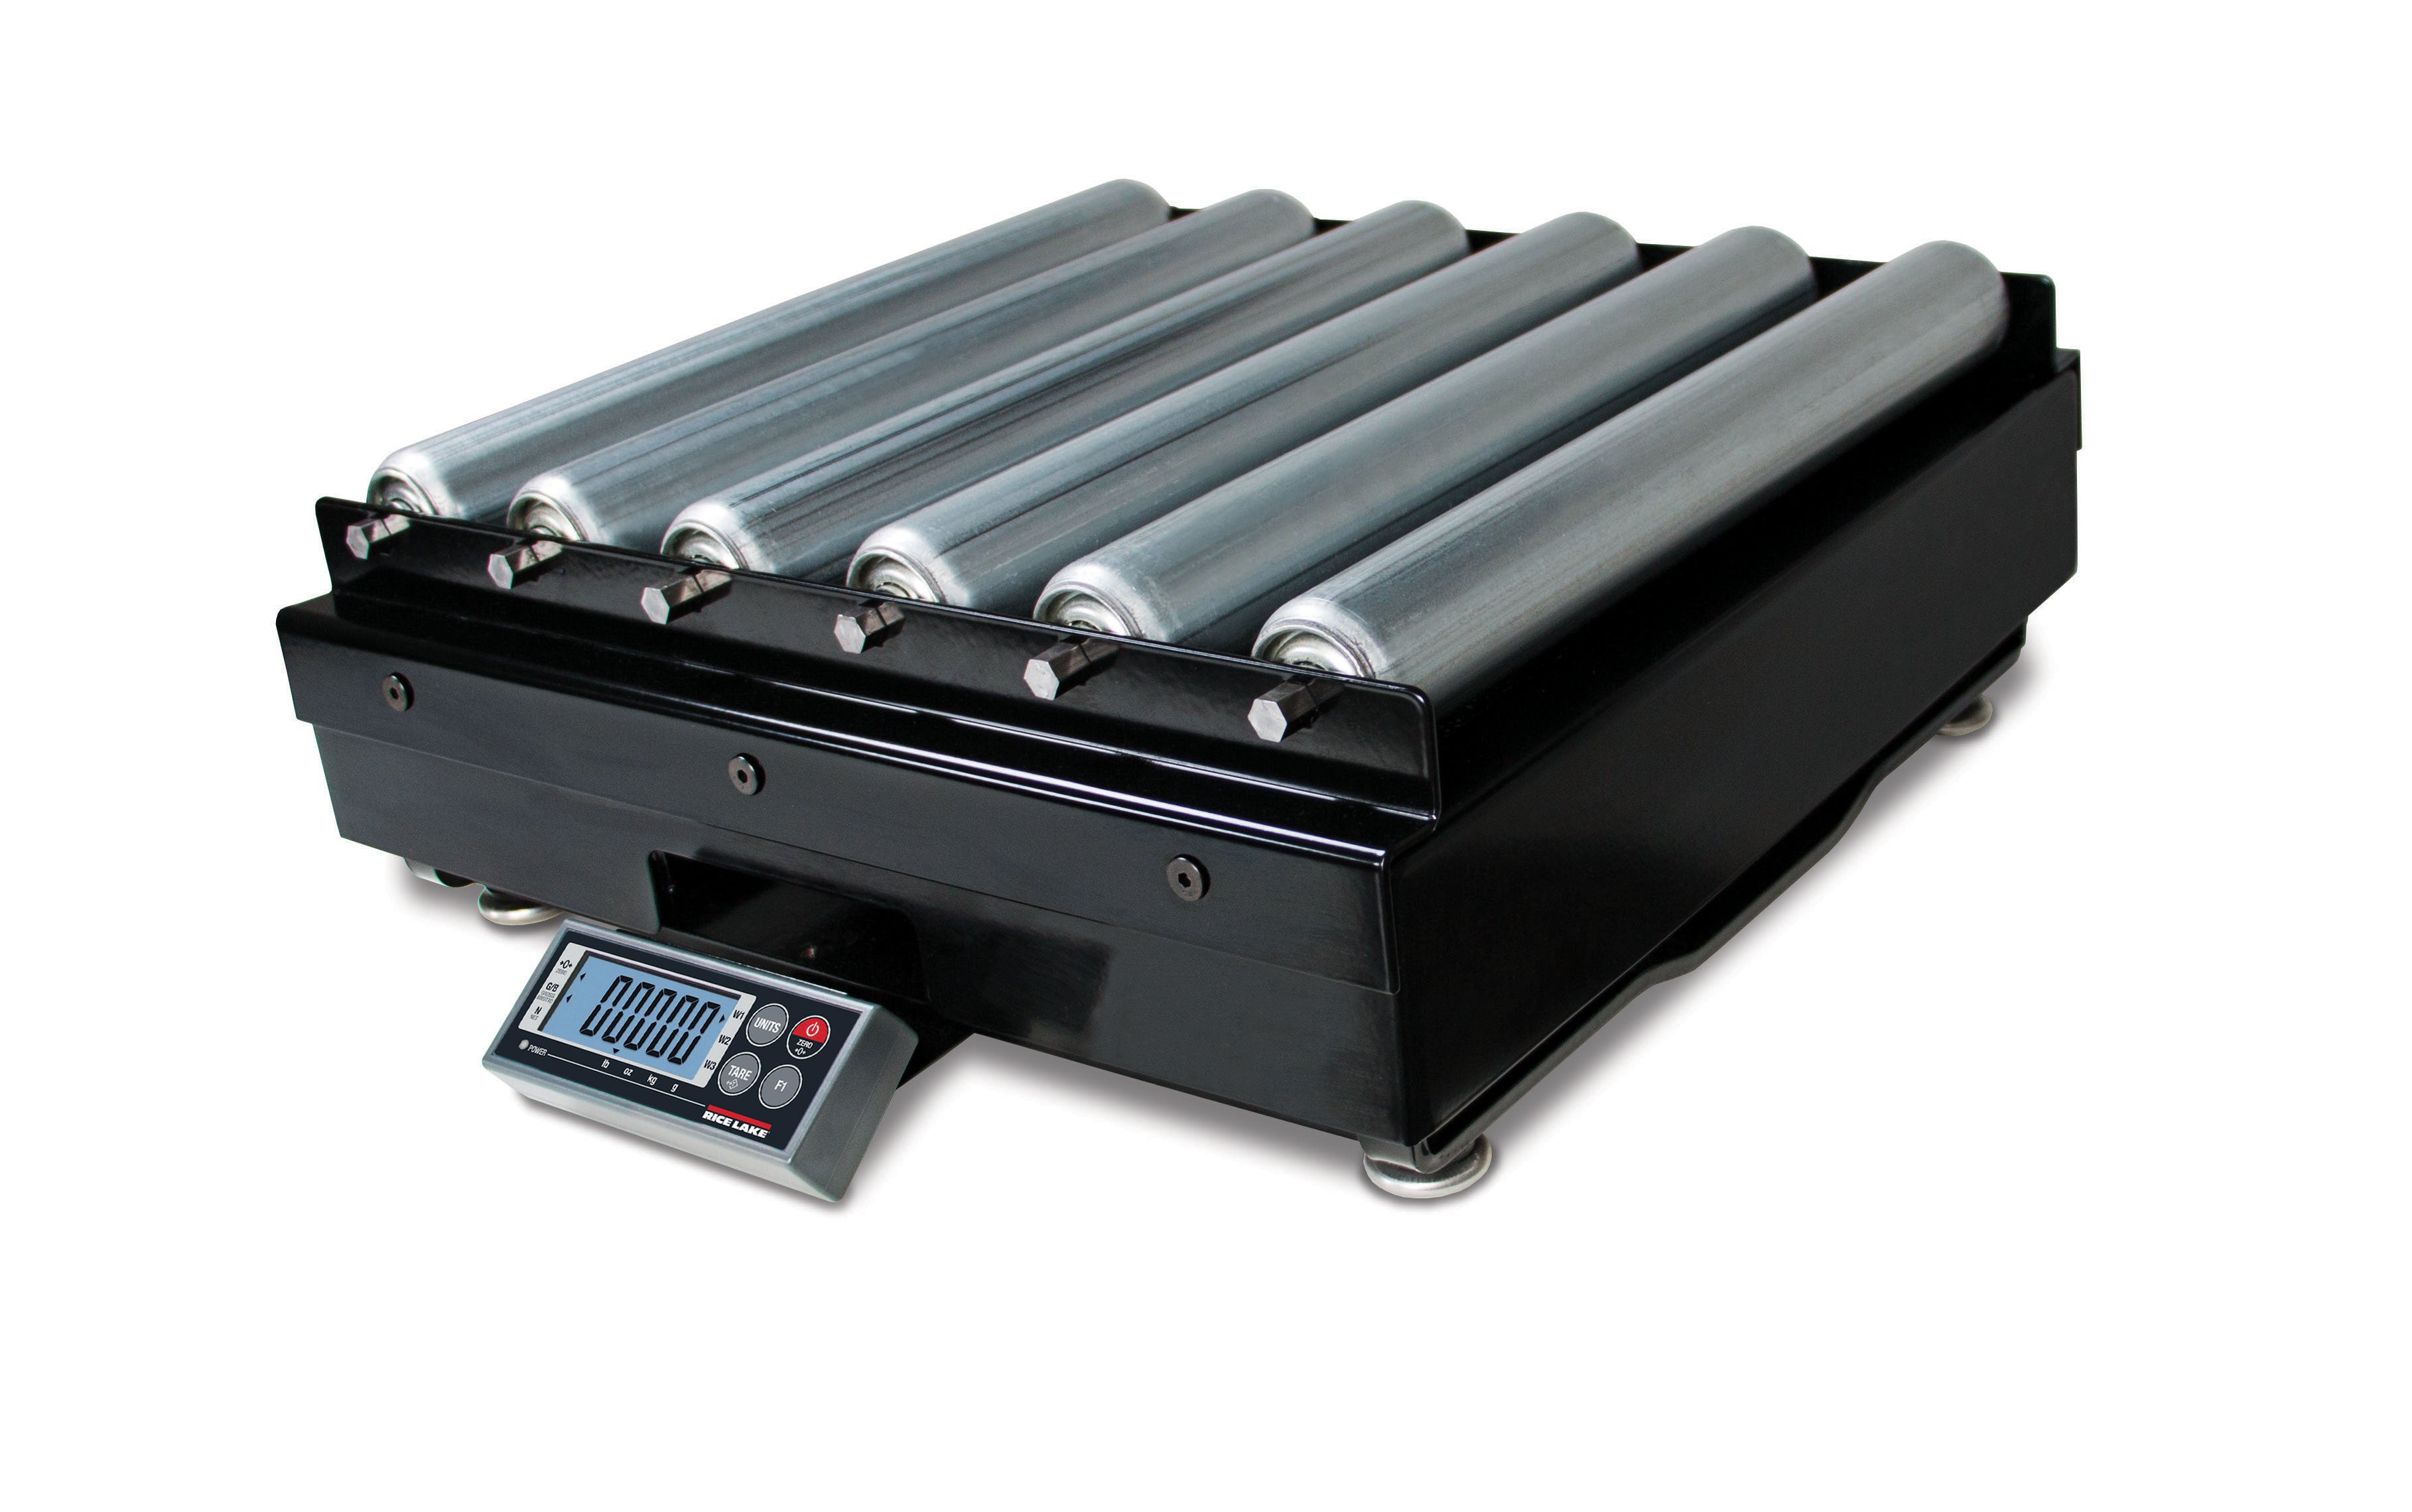 Rice Lake 182386 300 x 0.1 lb/150 x 0.05kg, BP 1818-150S Shipping Digital Scale, Roller Conveyor Top with 2 years Warranty